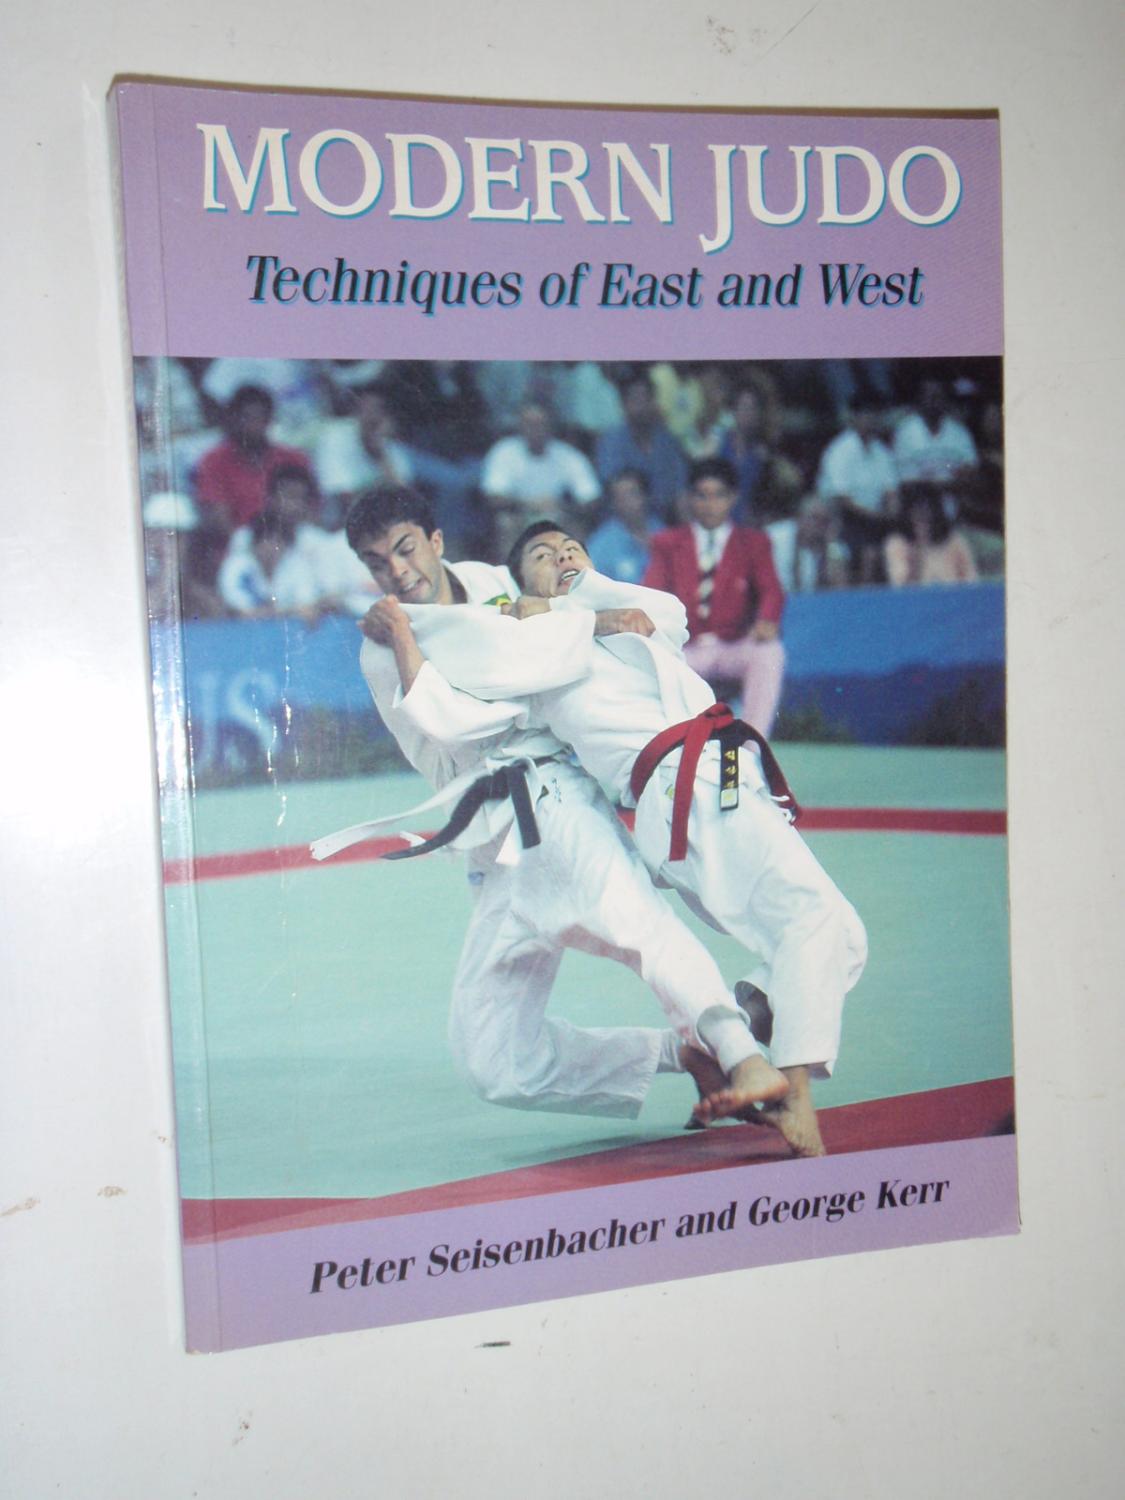 Modern Judo: Techniques of East and West - Peter Seisenbacher; George Kerr